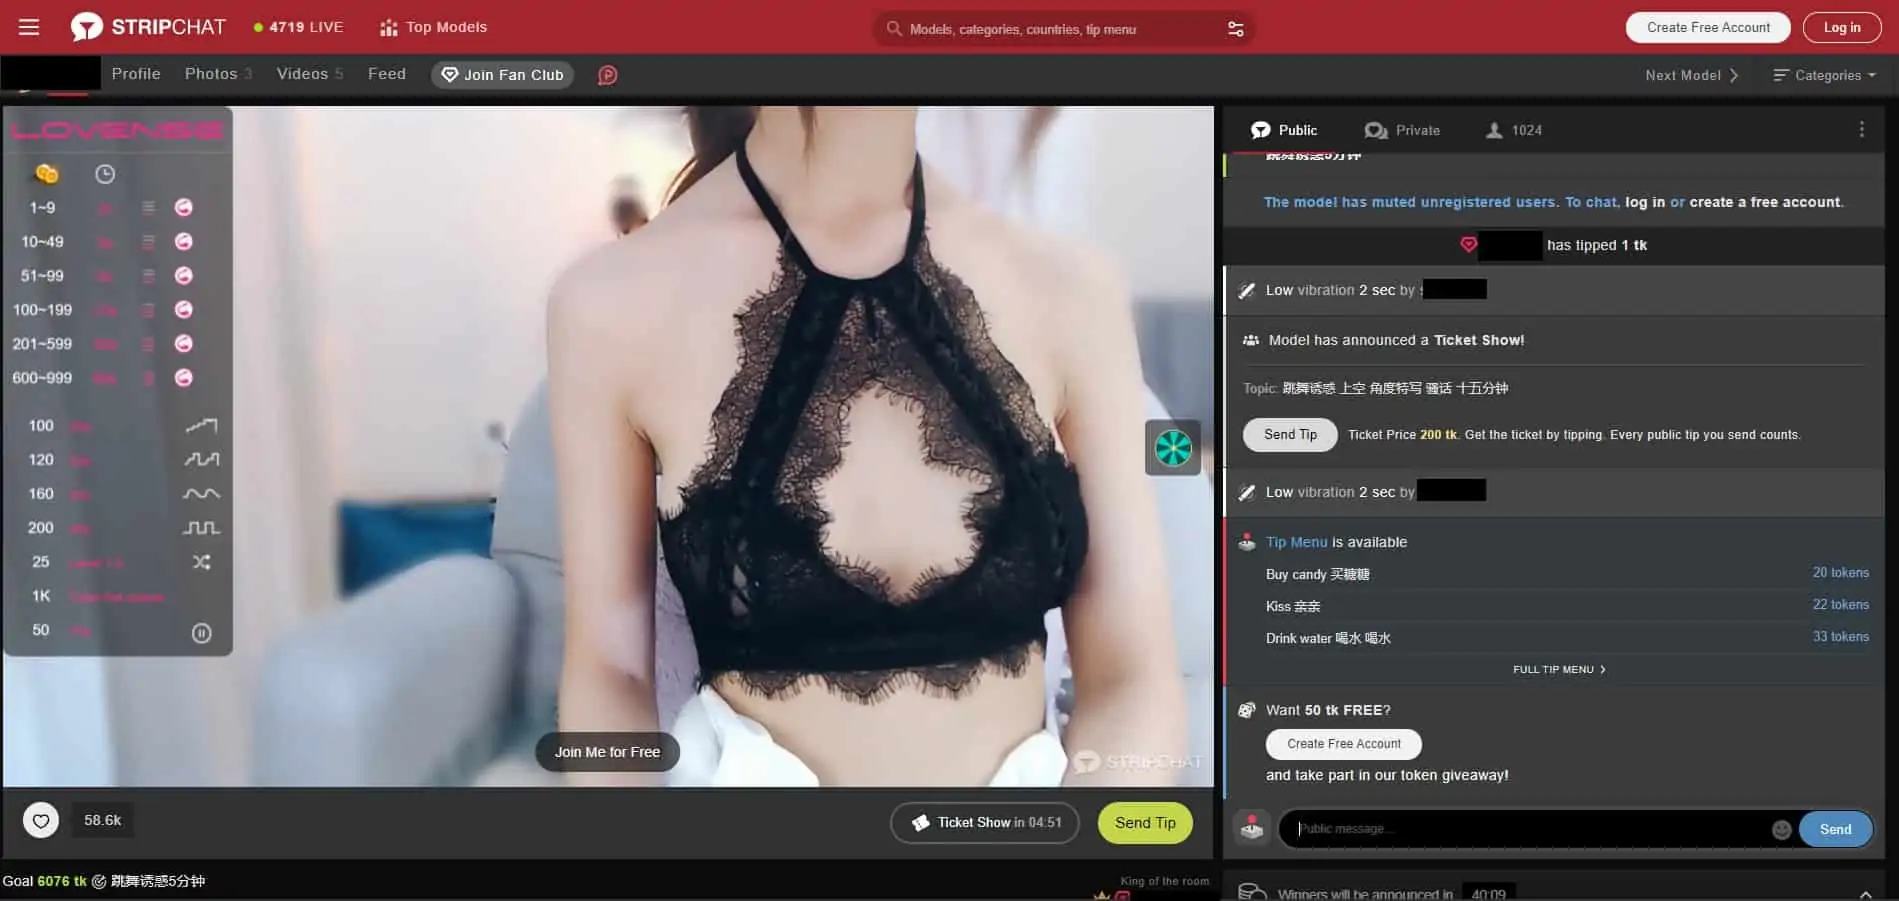 Sex cam site Stripchat exposes user, model info on the web report